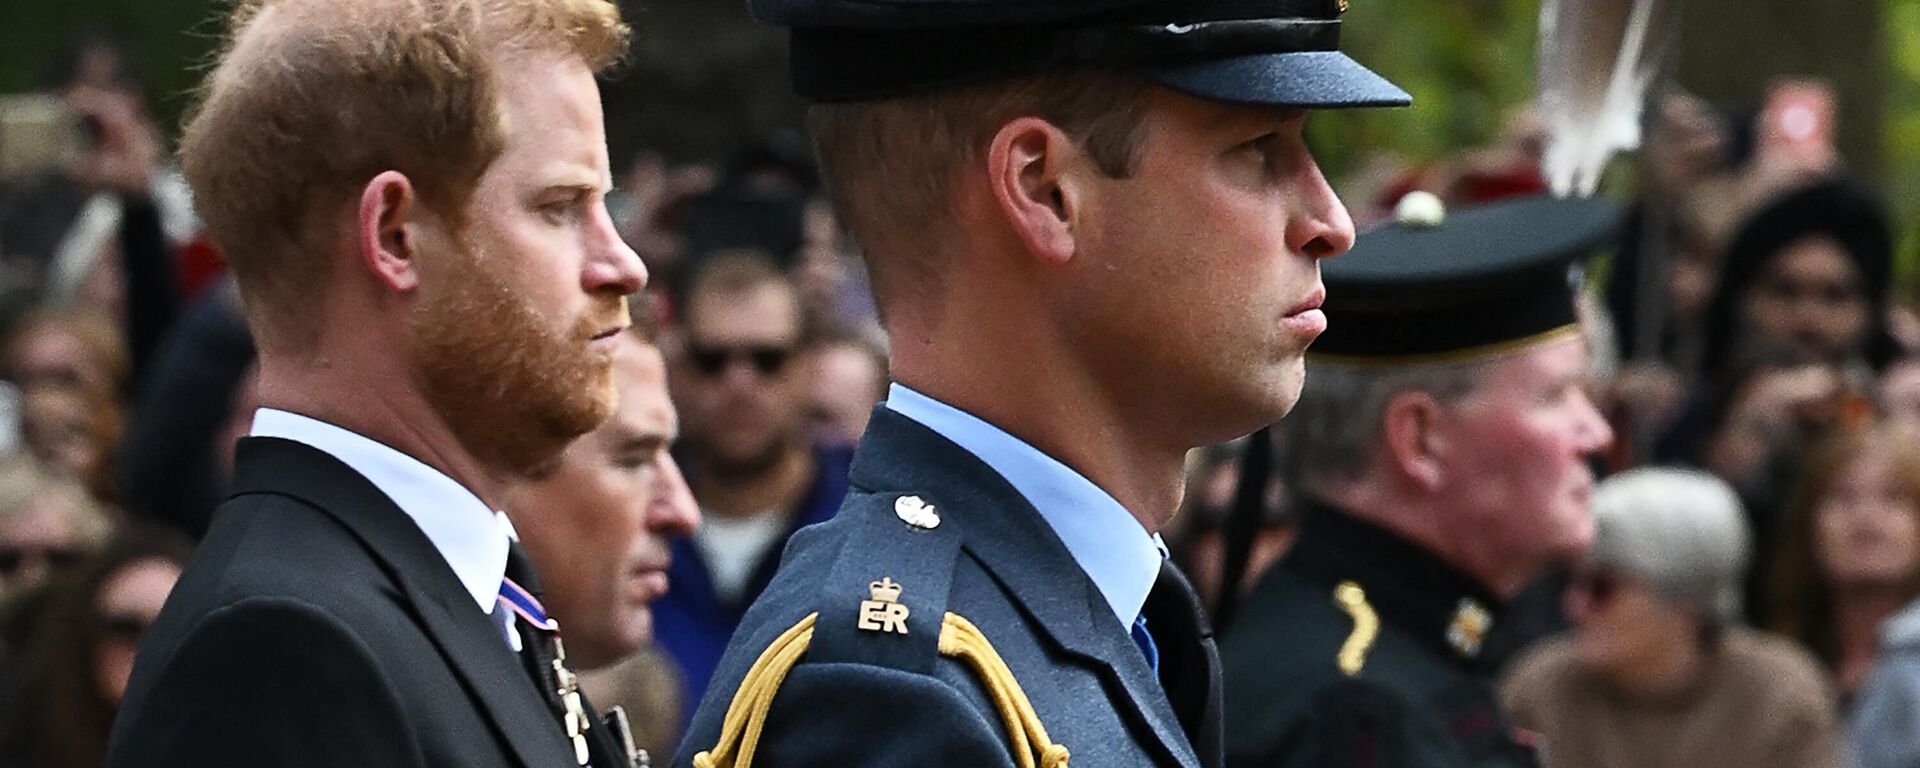 Britain's Prince William, Prince of Wales (R) and Britain's Prince Harry, Duke of Sussex  follow the coffin of Queen Elizabeth II, as it travels on the State Gun Carriage of the Royal Navy, from Westminster Abbey to Wellington Arch in London on September 19, 2022 - Sputnik International, 1920, 02.01.2023